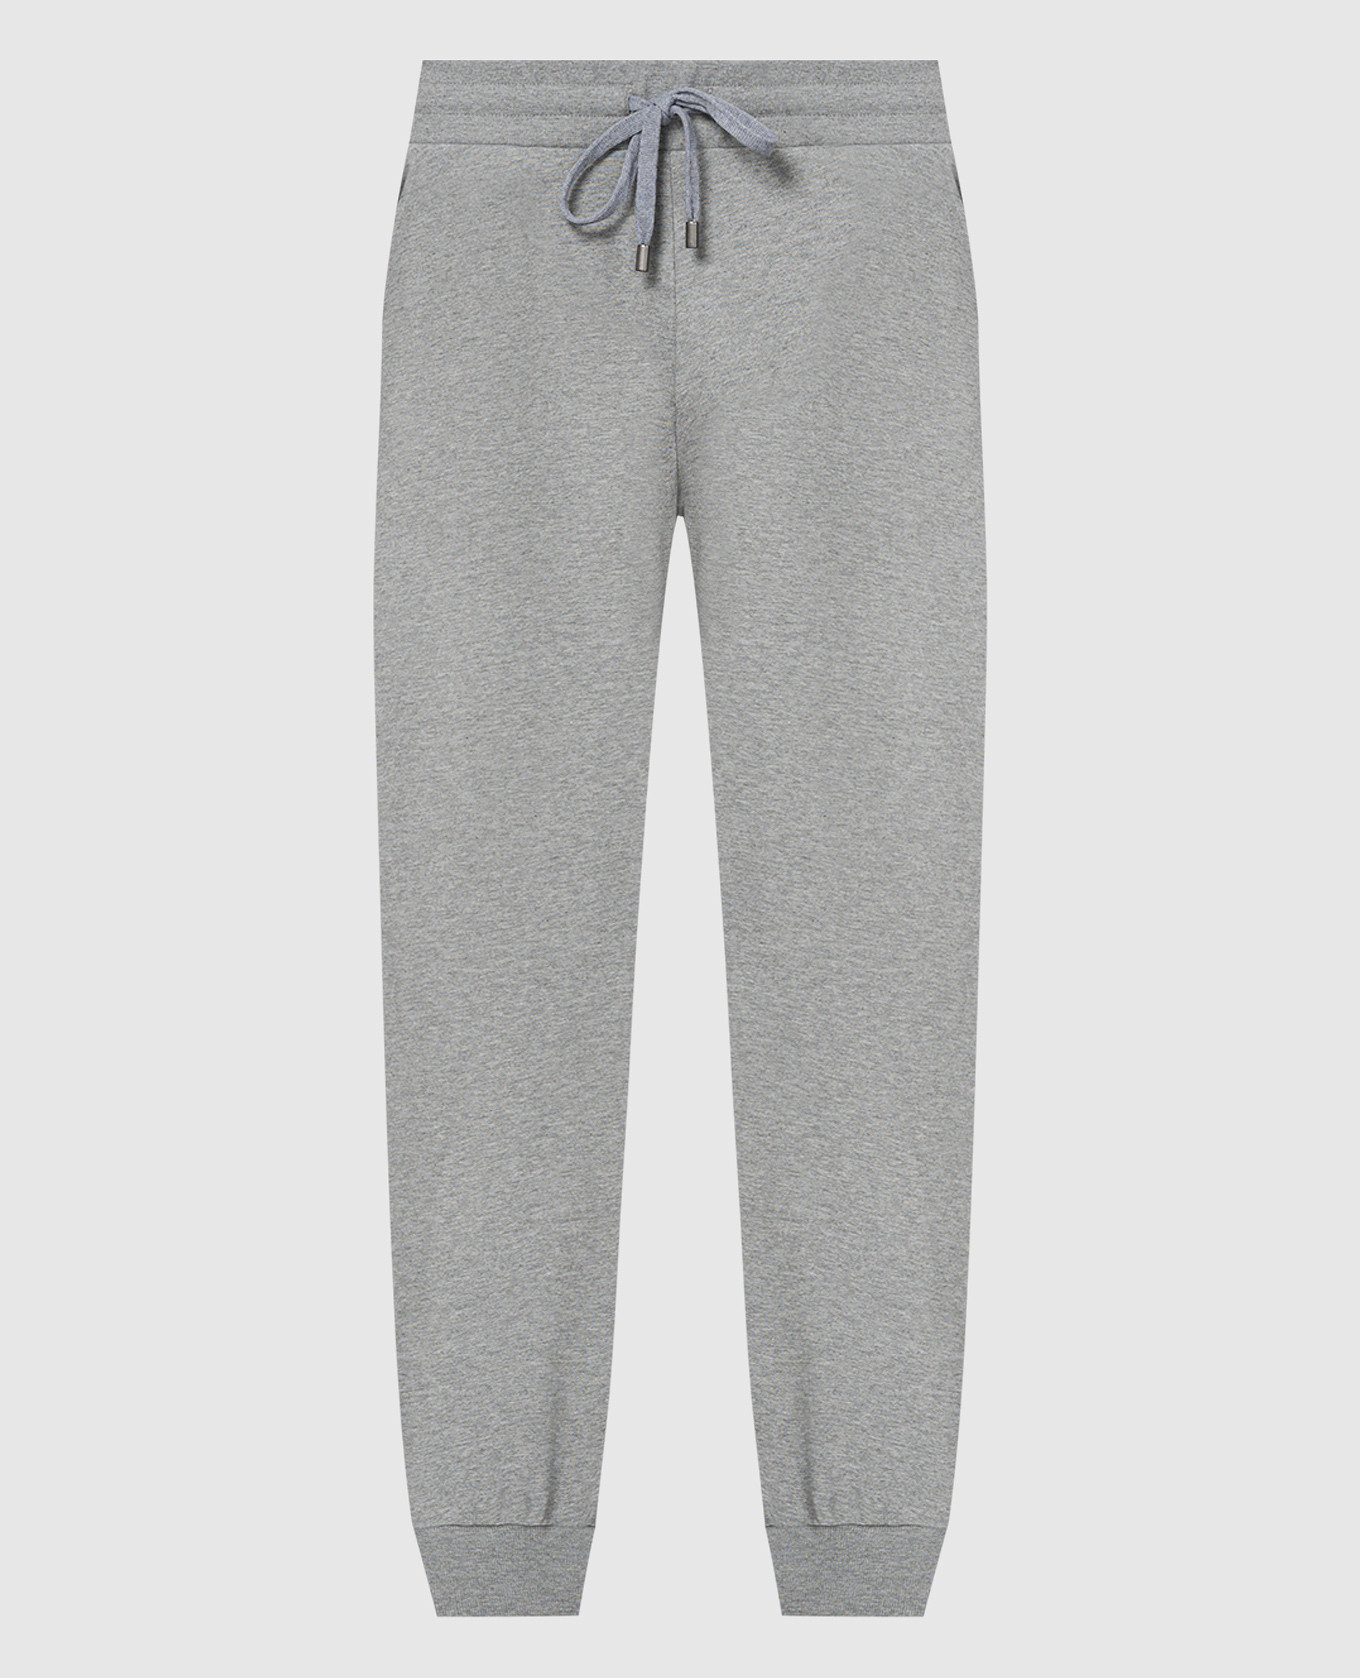 Gray joggers with embroidery